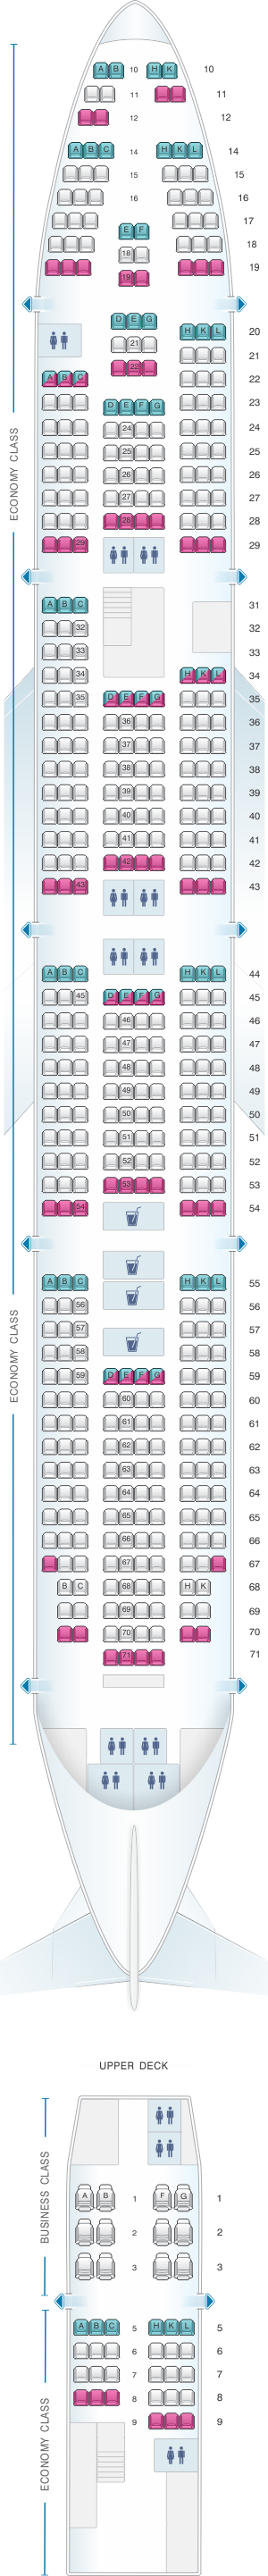 Seat map for Rossiya Airlines Boeing B747 400 V1